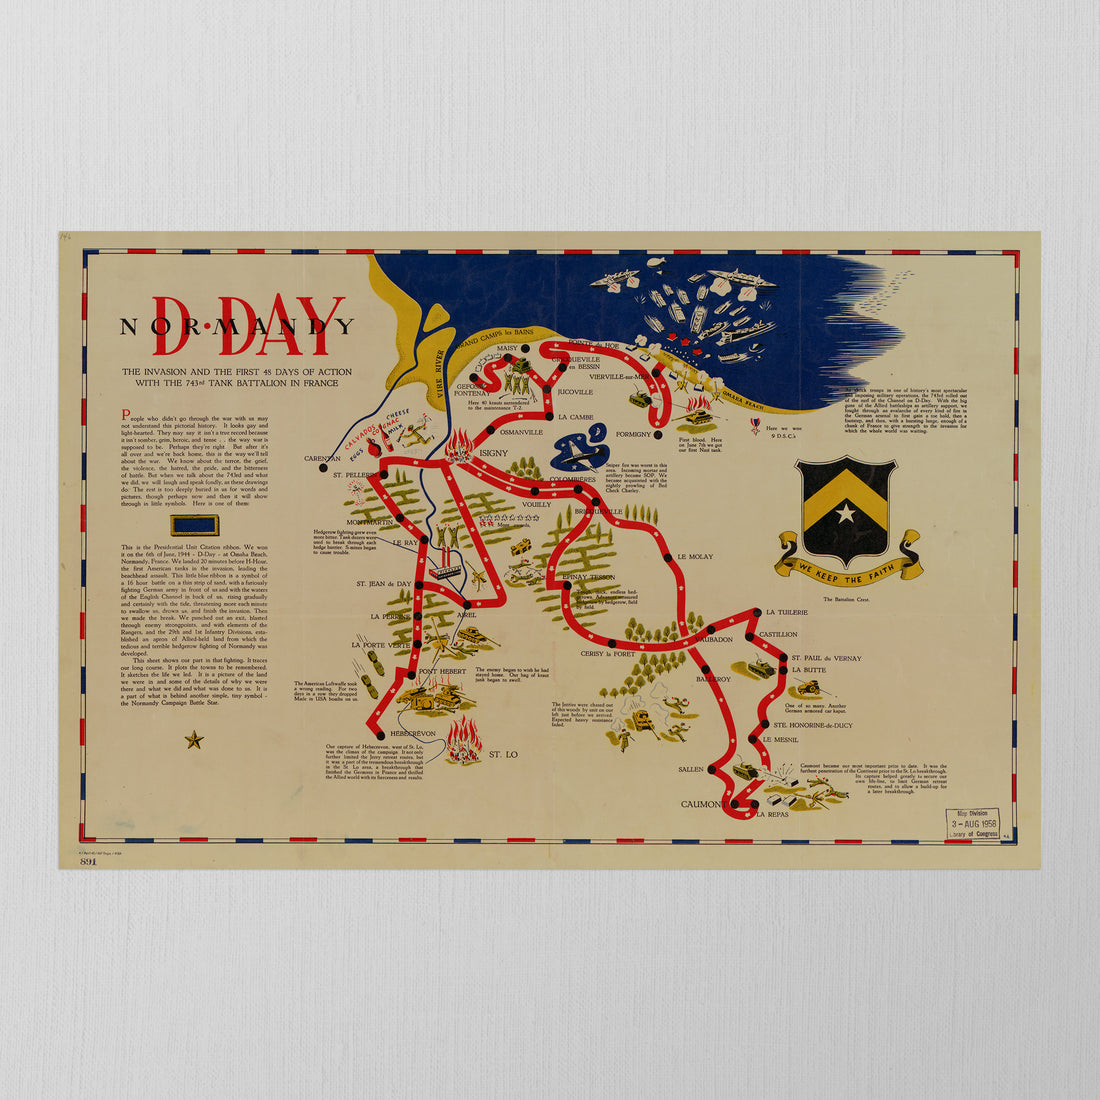 D-Day Normandy 743 by Army Corps of Engineers, 1945